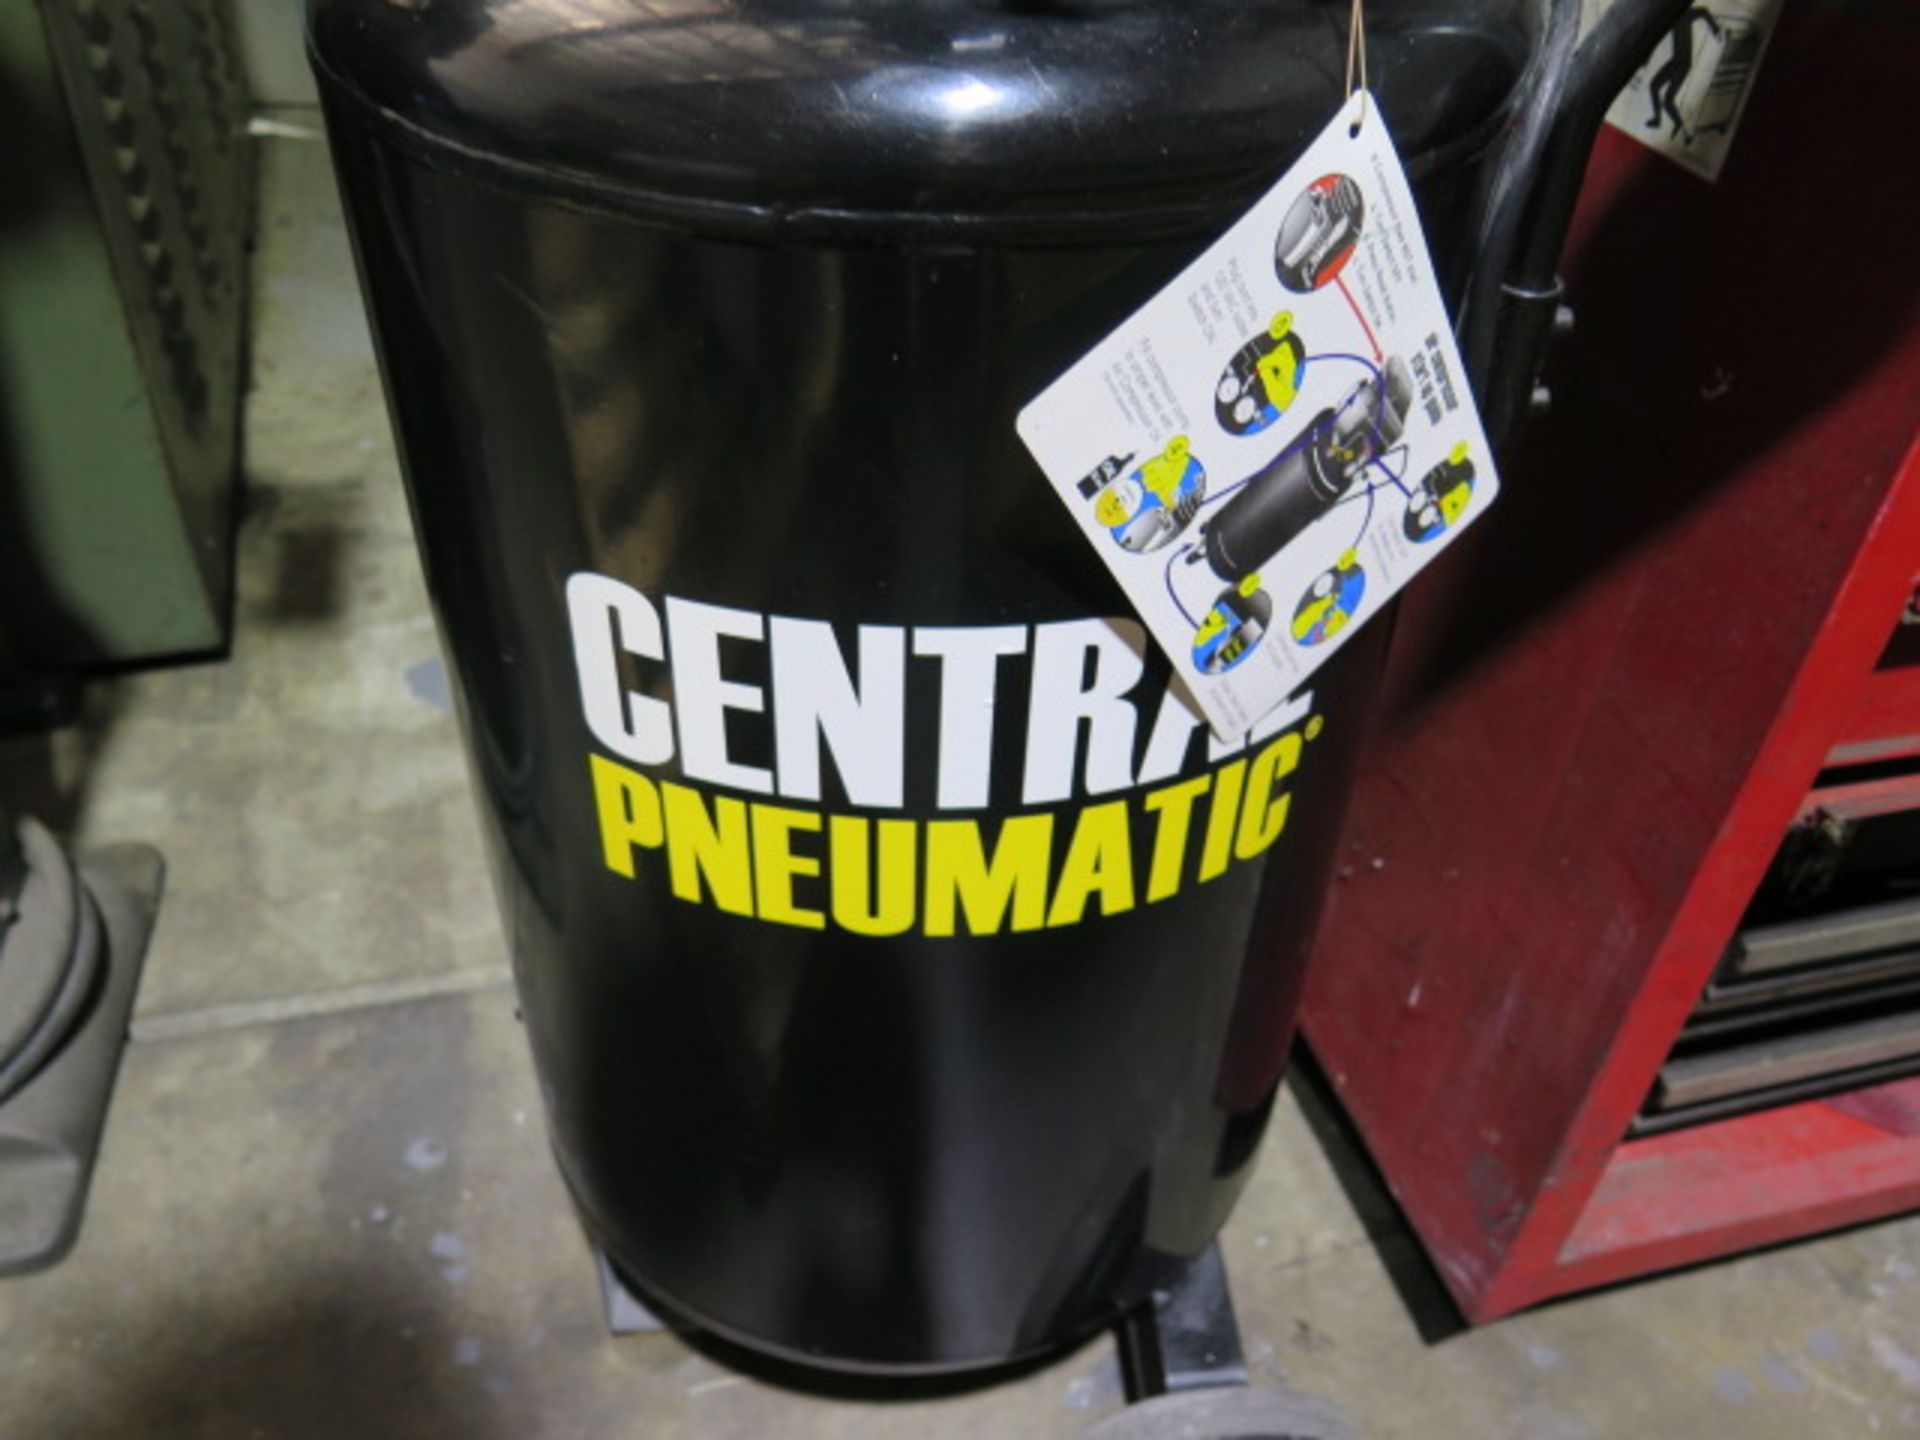 Central Pneumatic Portable 2.5Hp Air Compressor w/ 21 Gallon Tank (SOLD AS-IS - NO WARRANTY) - Image 5 of 5